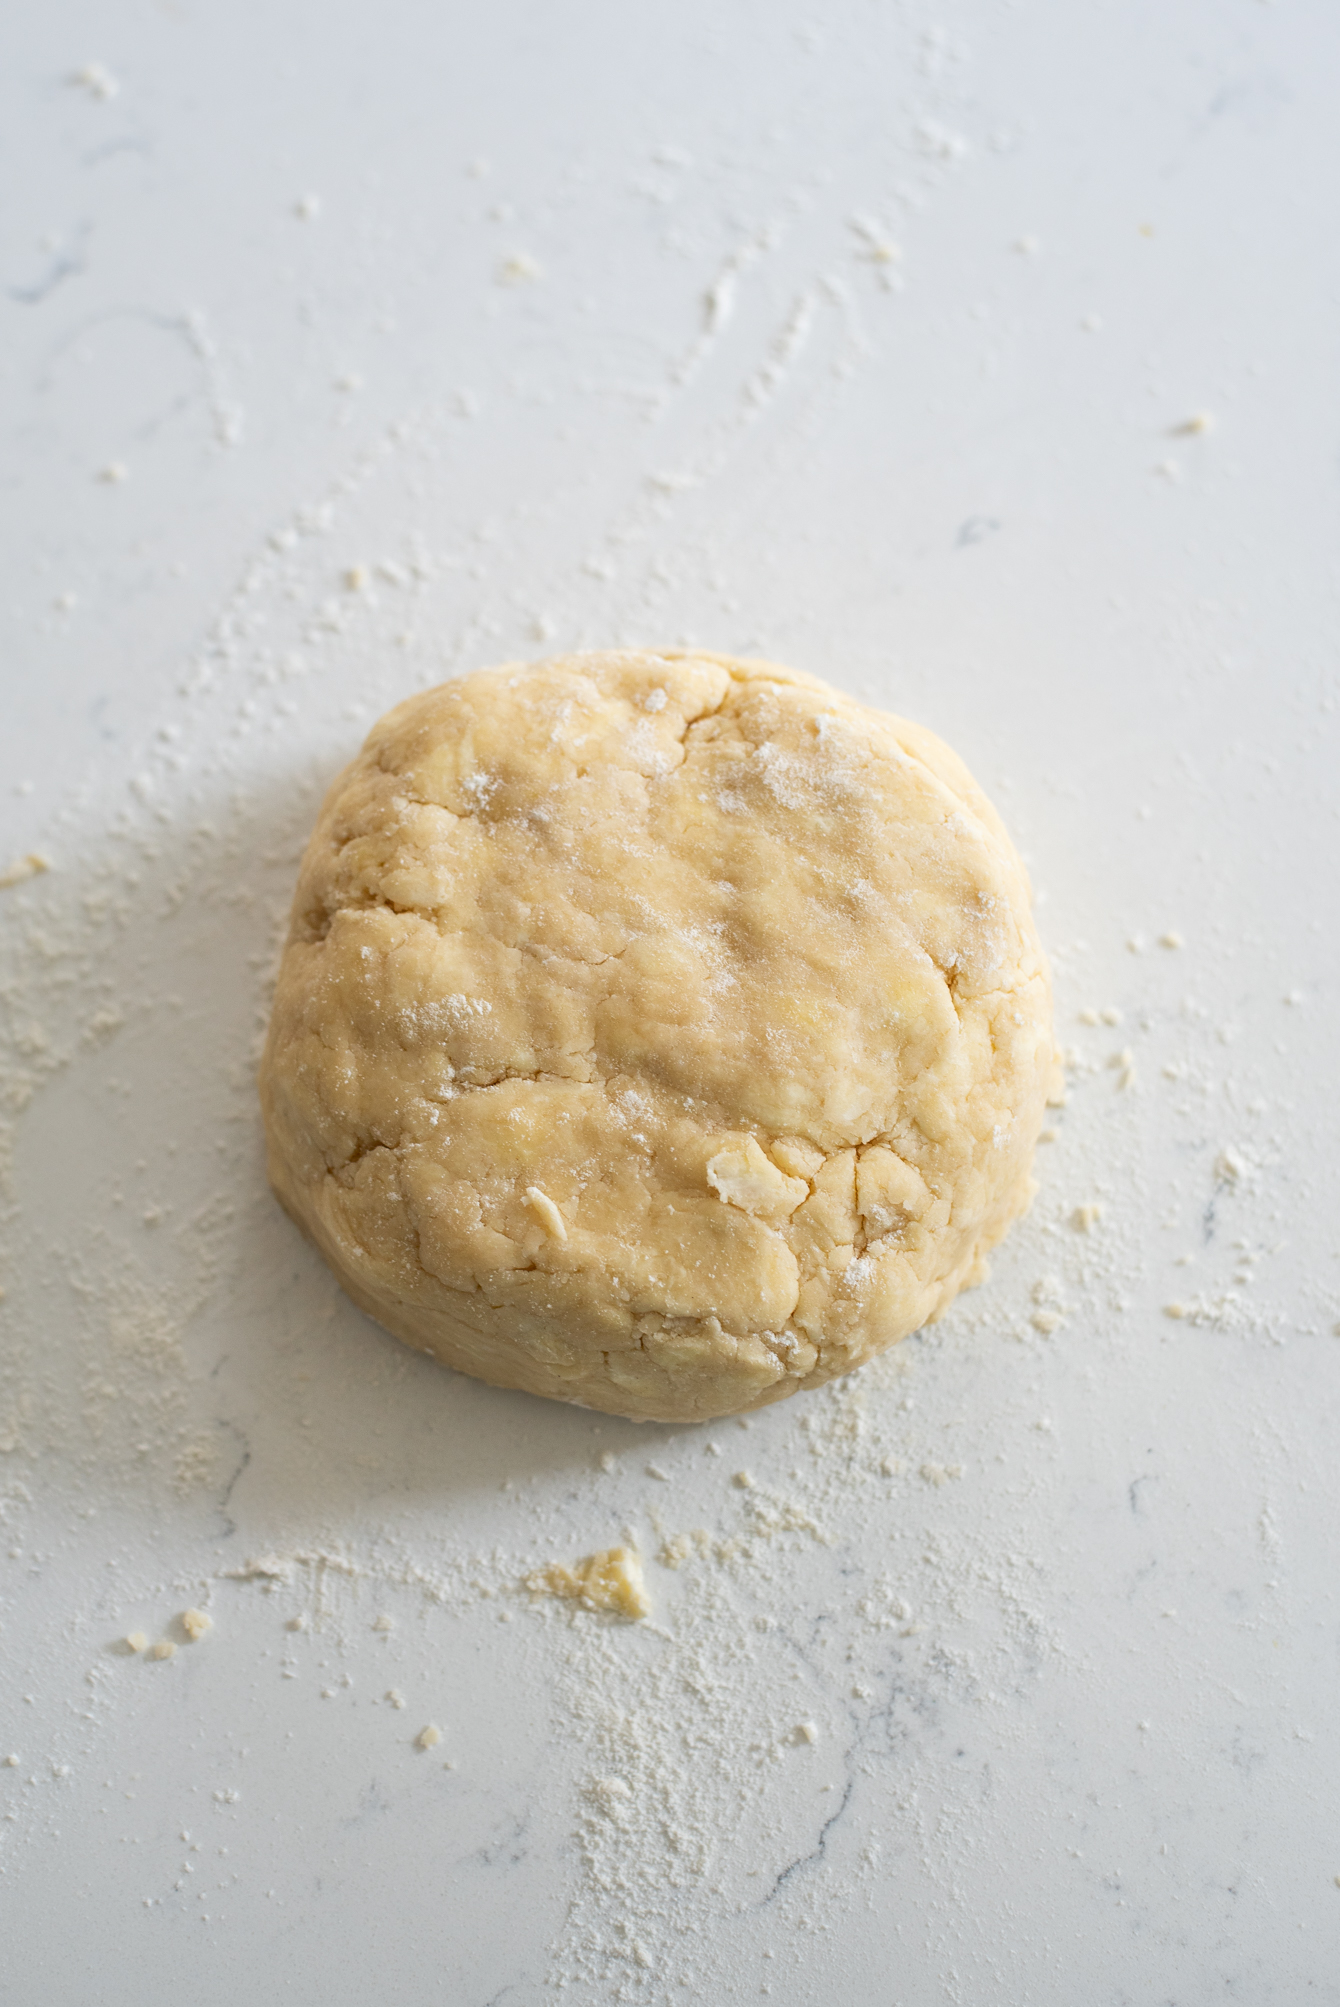 Lard and butter Pie dough is gathered to form a disk shape.